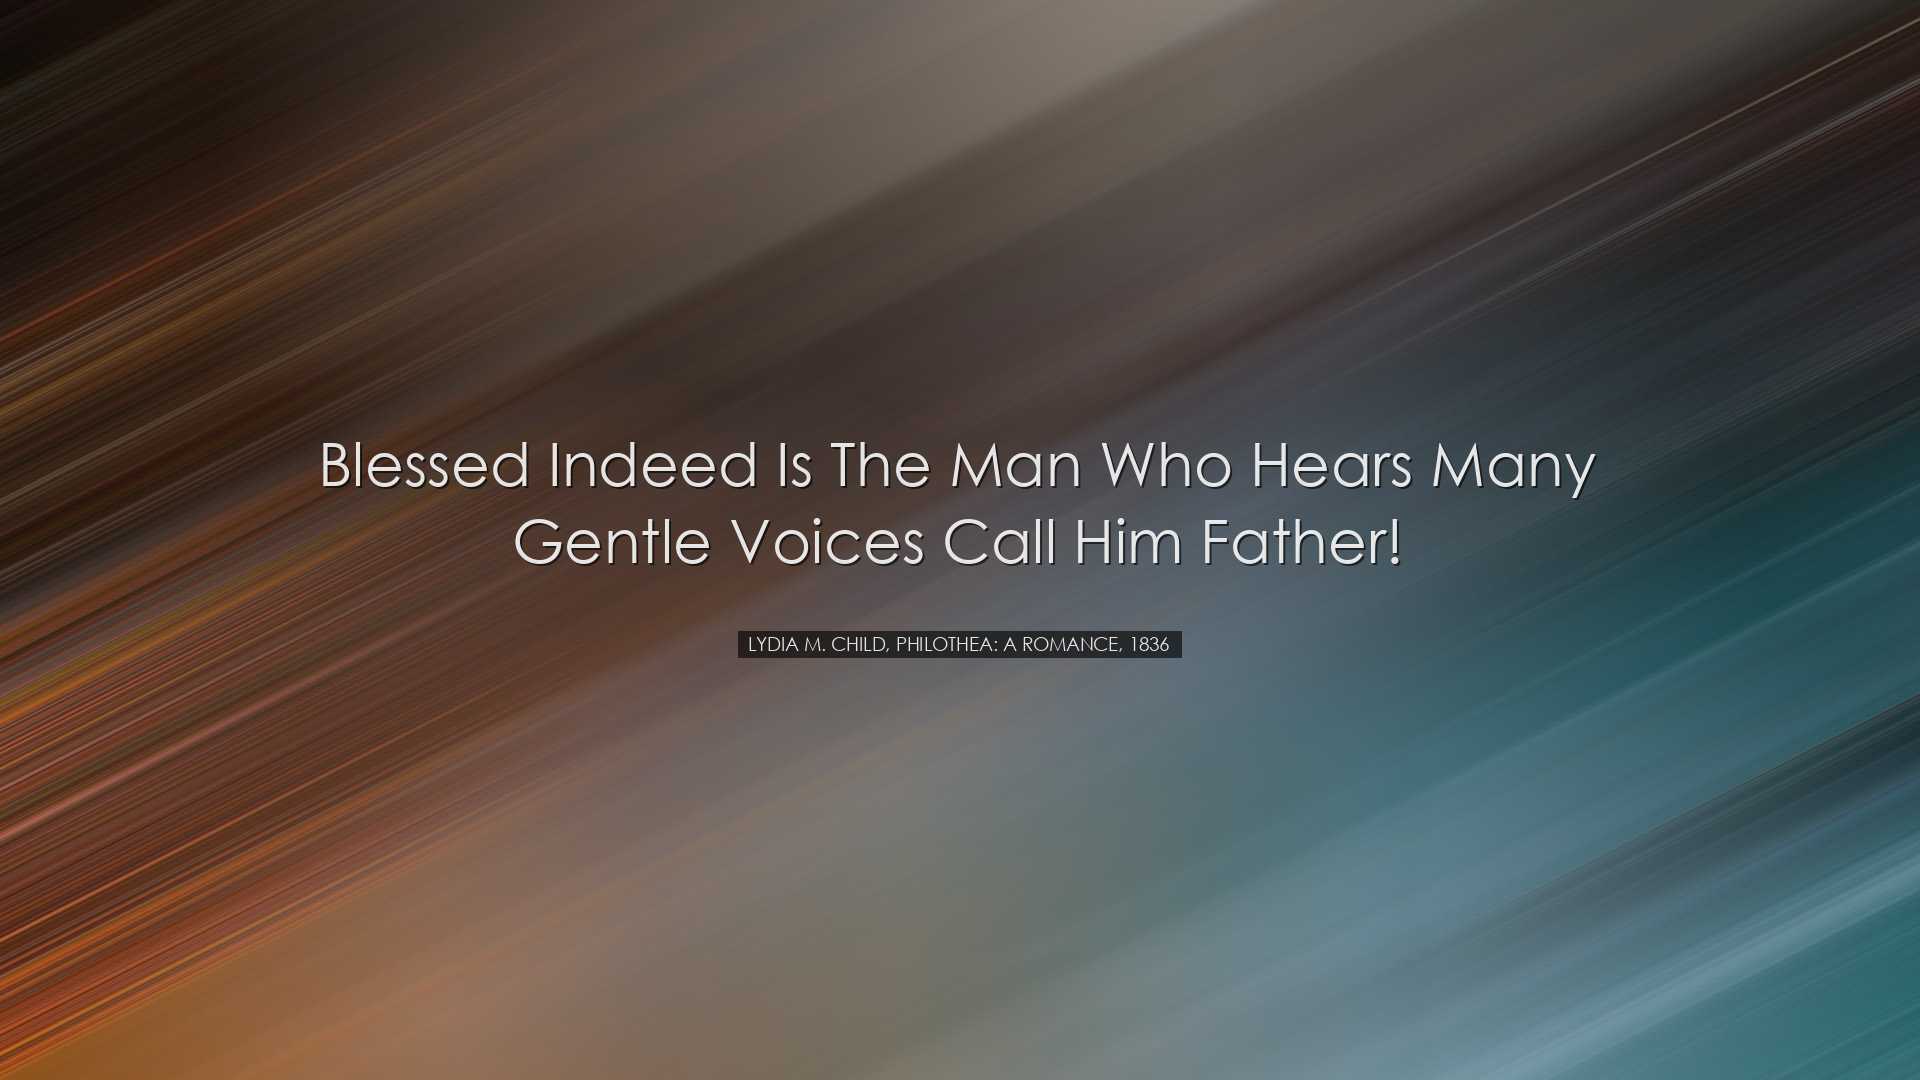 Blessed indeed is the man who hears many gentle voices call him fa